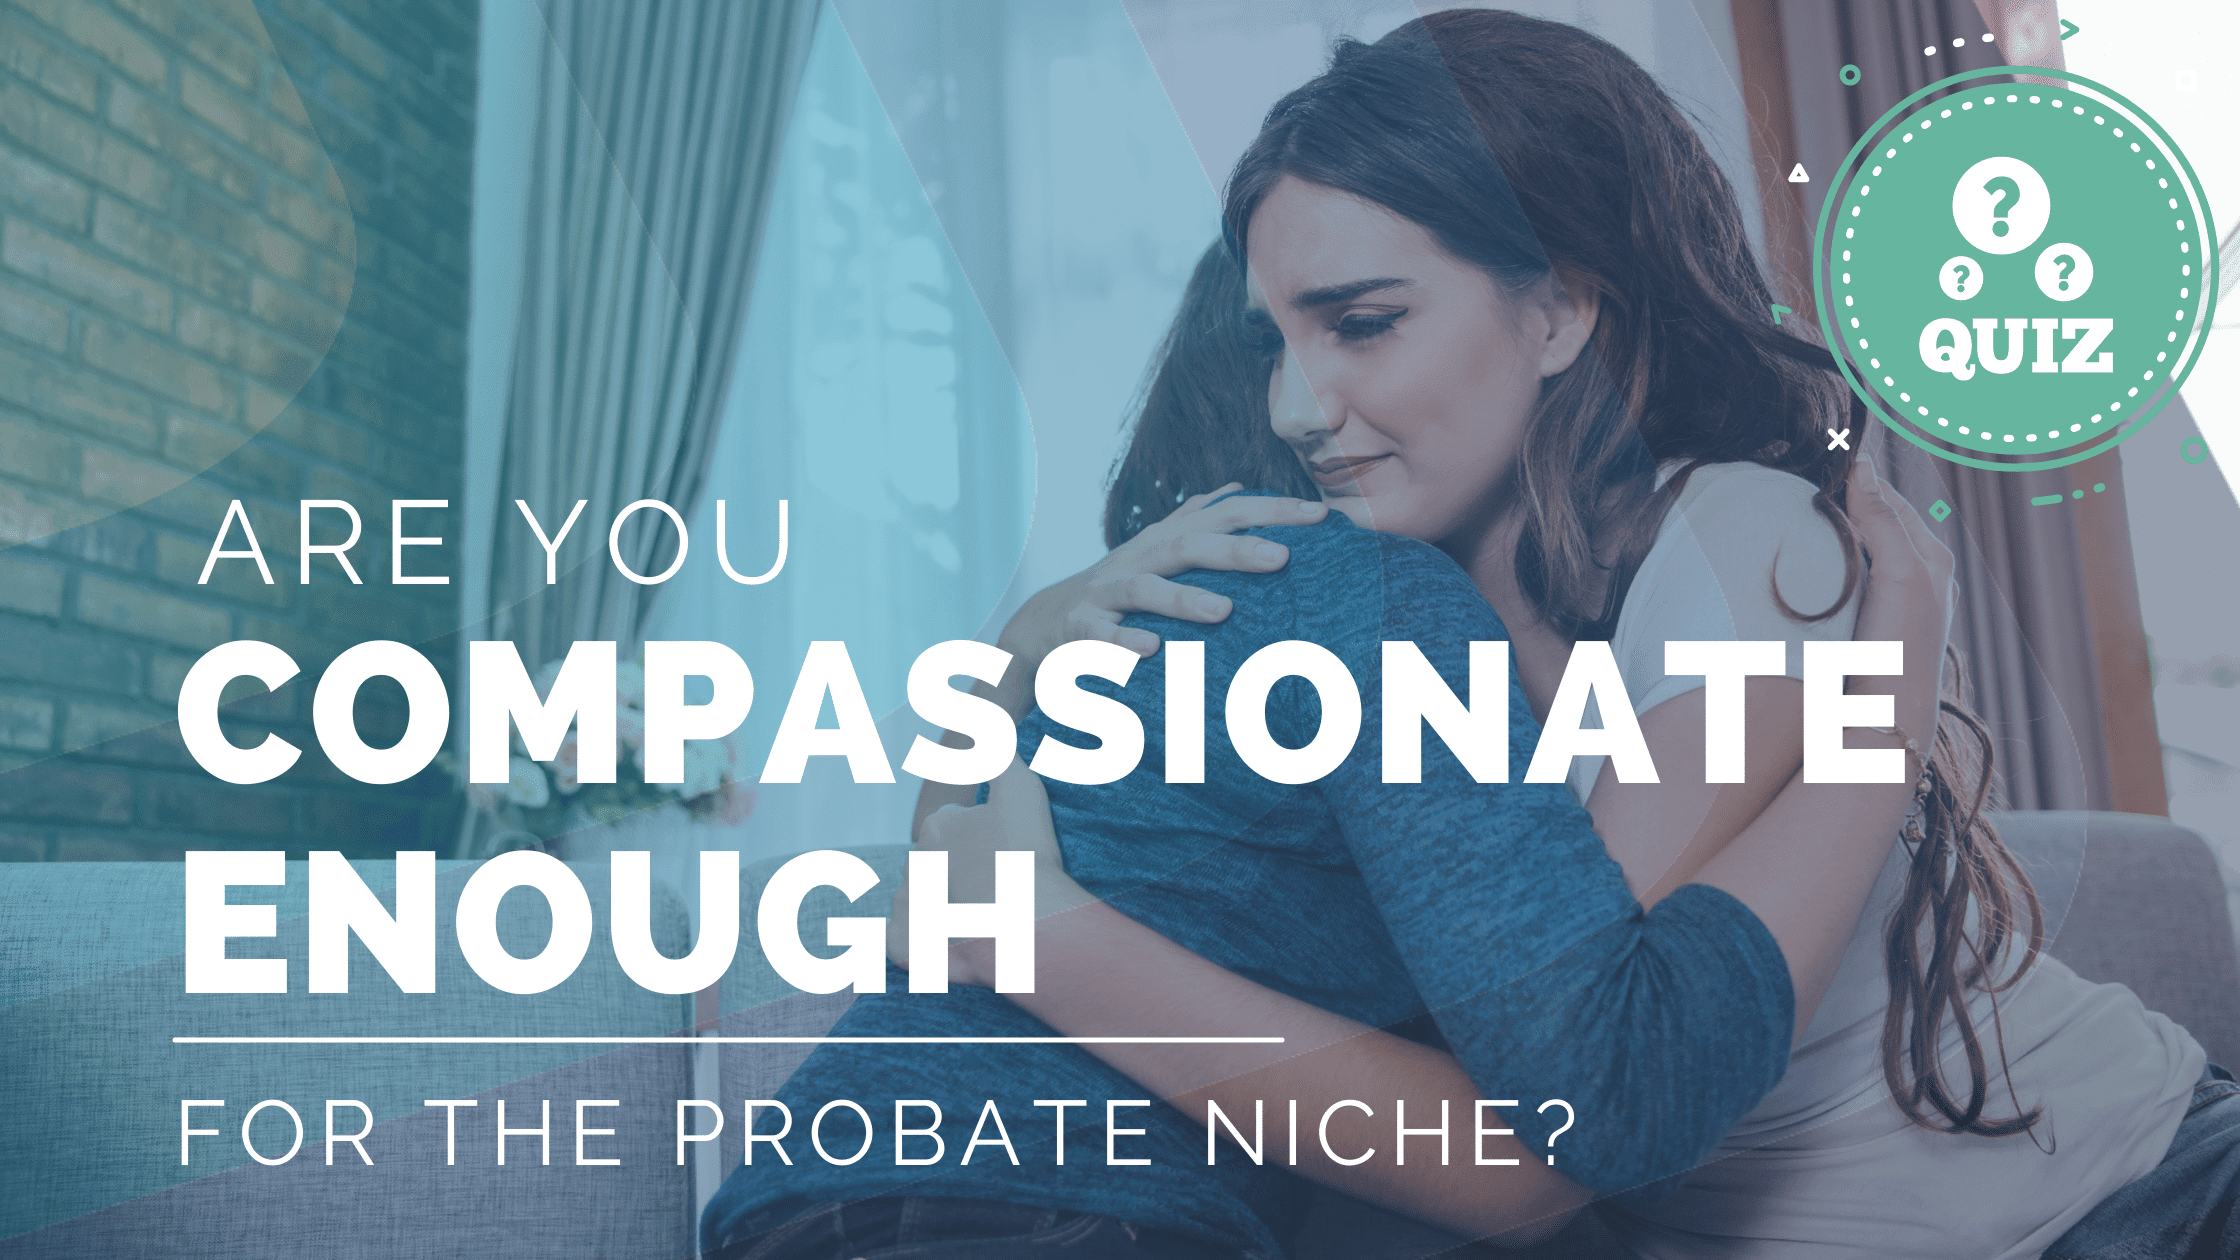 Featured image for “Are you compassionate enough for the probate niche? [Empathy quiz]”